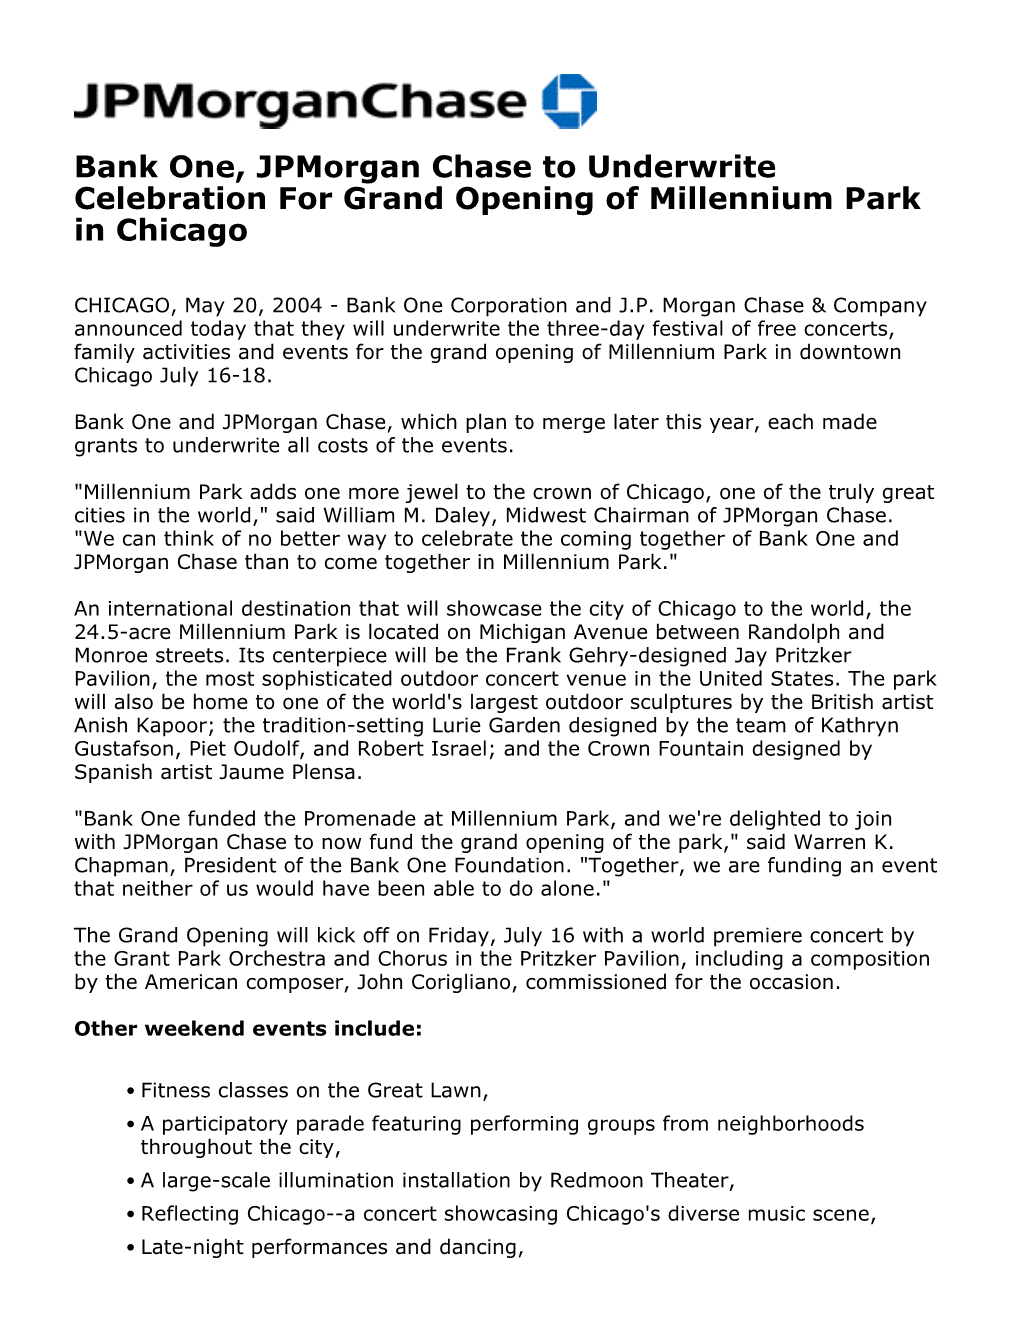 Bank One, Jpmorgan Chase to Underwrite Celebration for Grand Opening of Millennium Park in Chicago